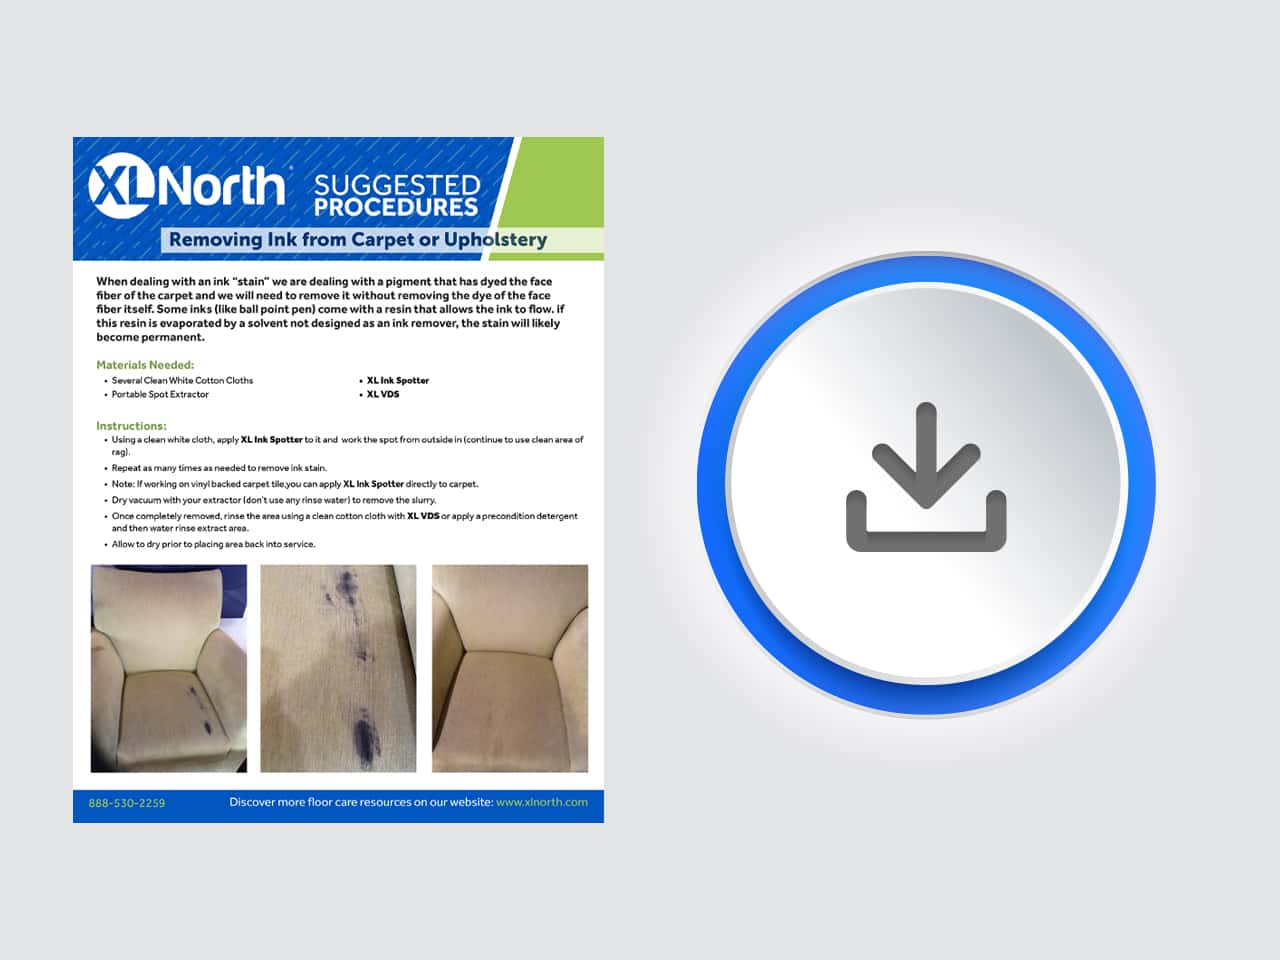 XL North Suggested Procedures: Remove Ink from Carpet or Upholstery